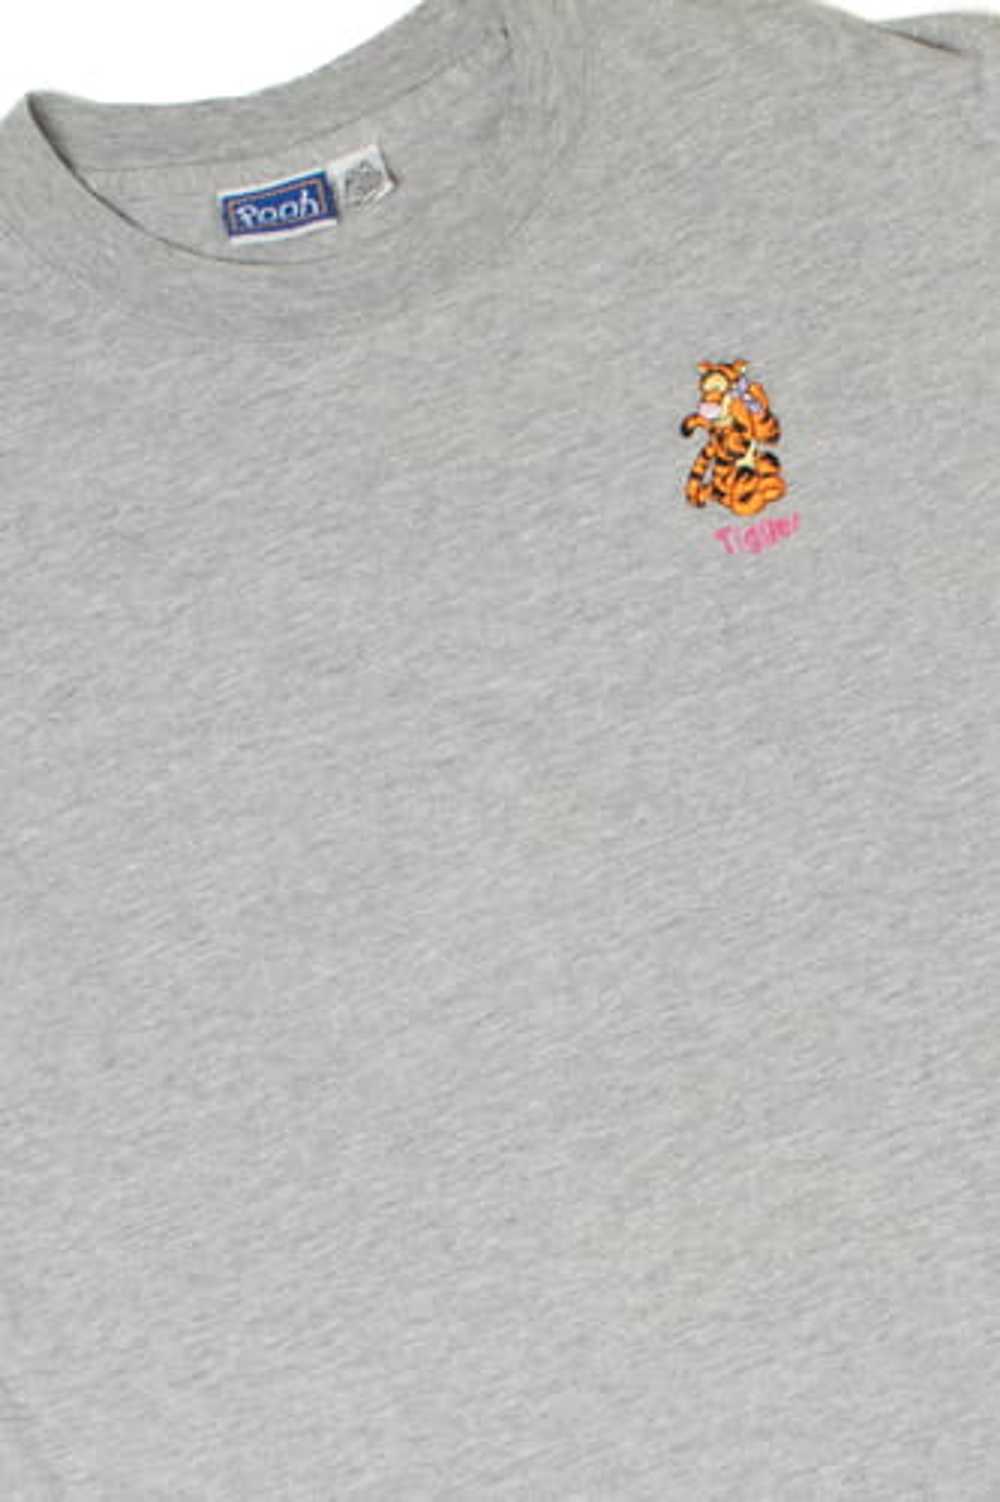 Vintage Tigger Embroidered Winnie The Pooh T-Shirt - image 2